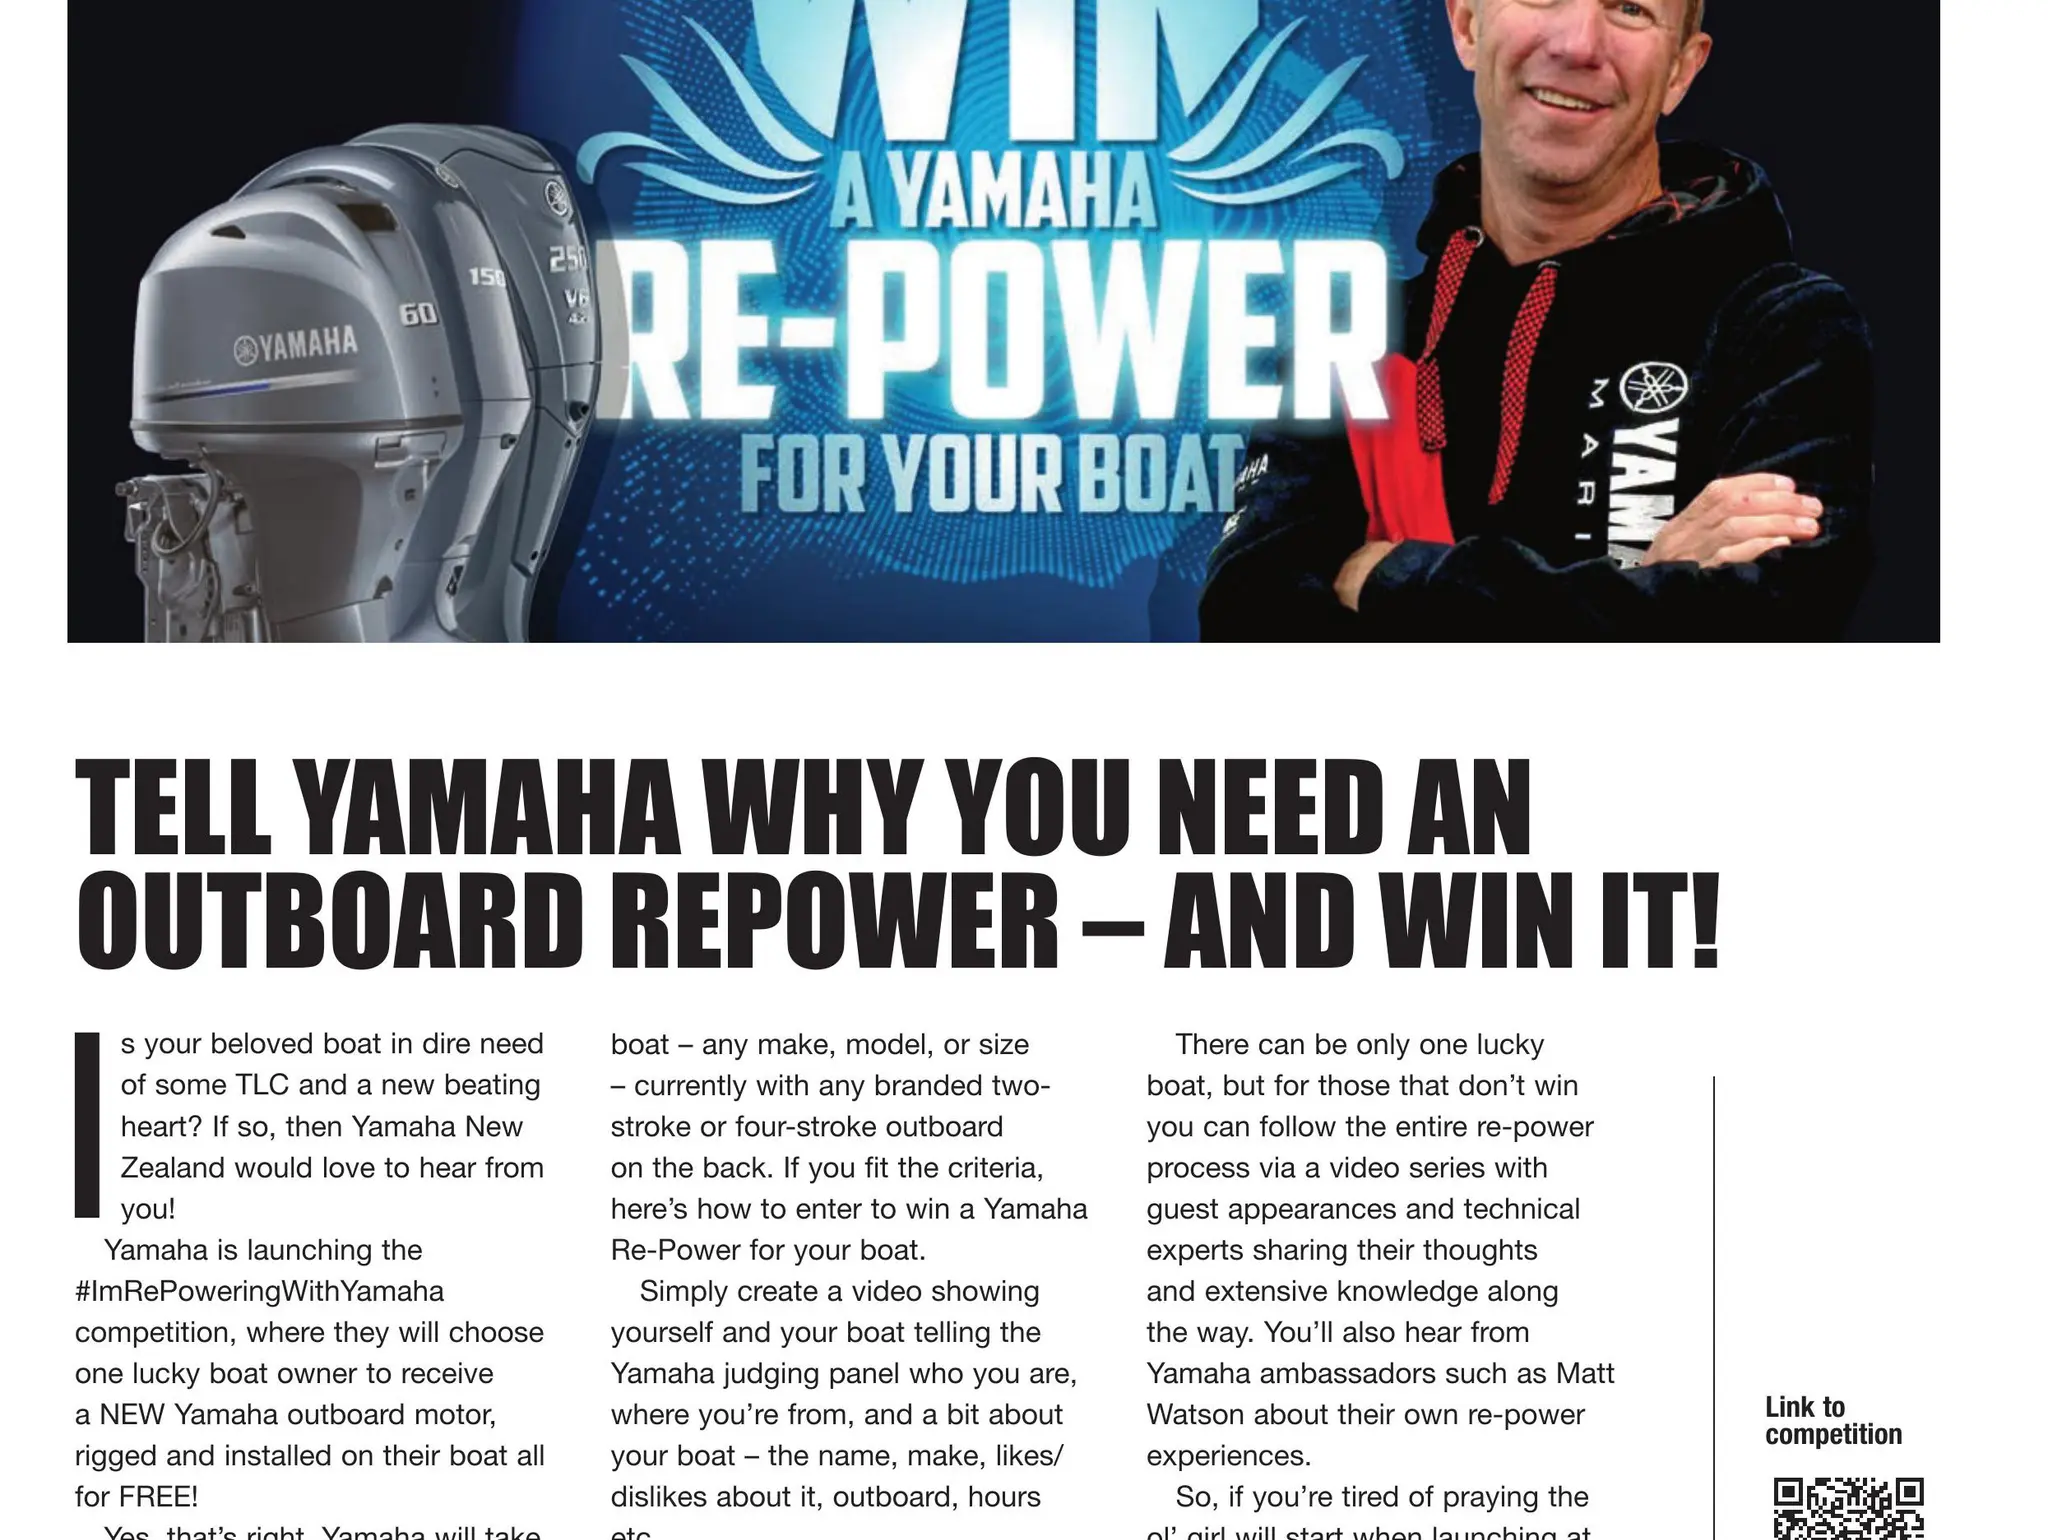 TELL YAMAHA WHY YOU NEED AN OUTBOARD REPOWER – AND WIN IT!